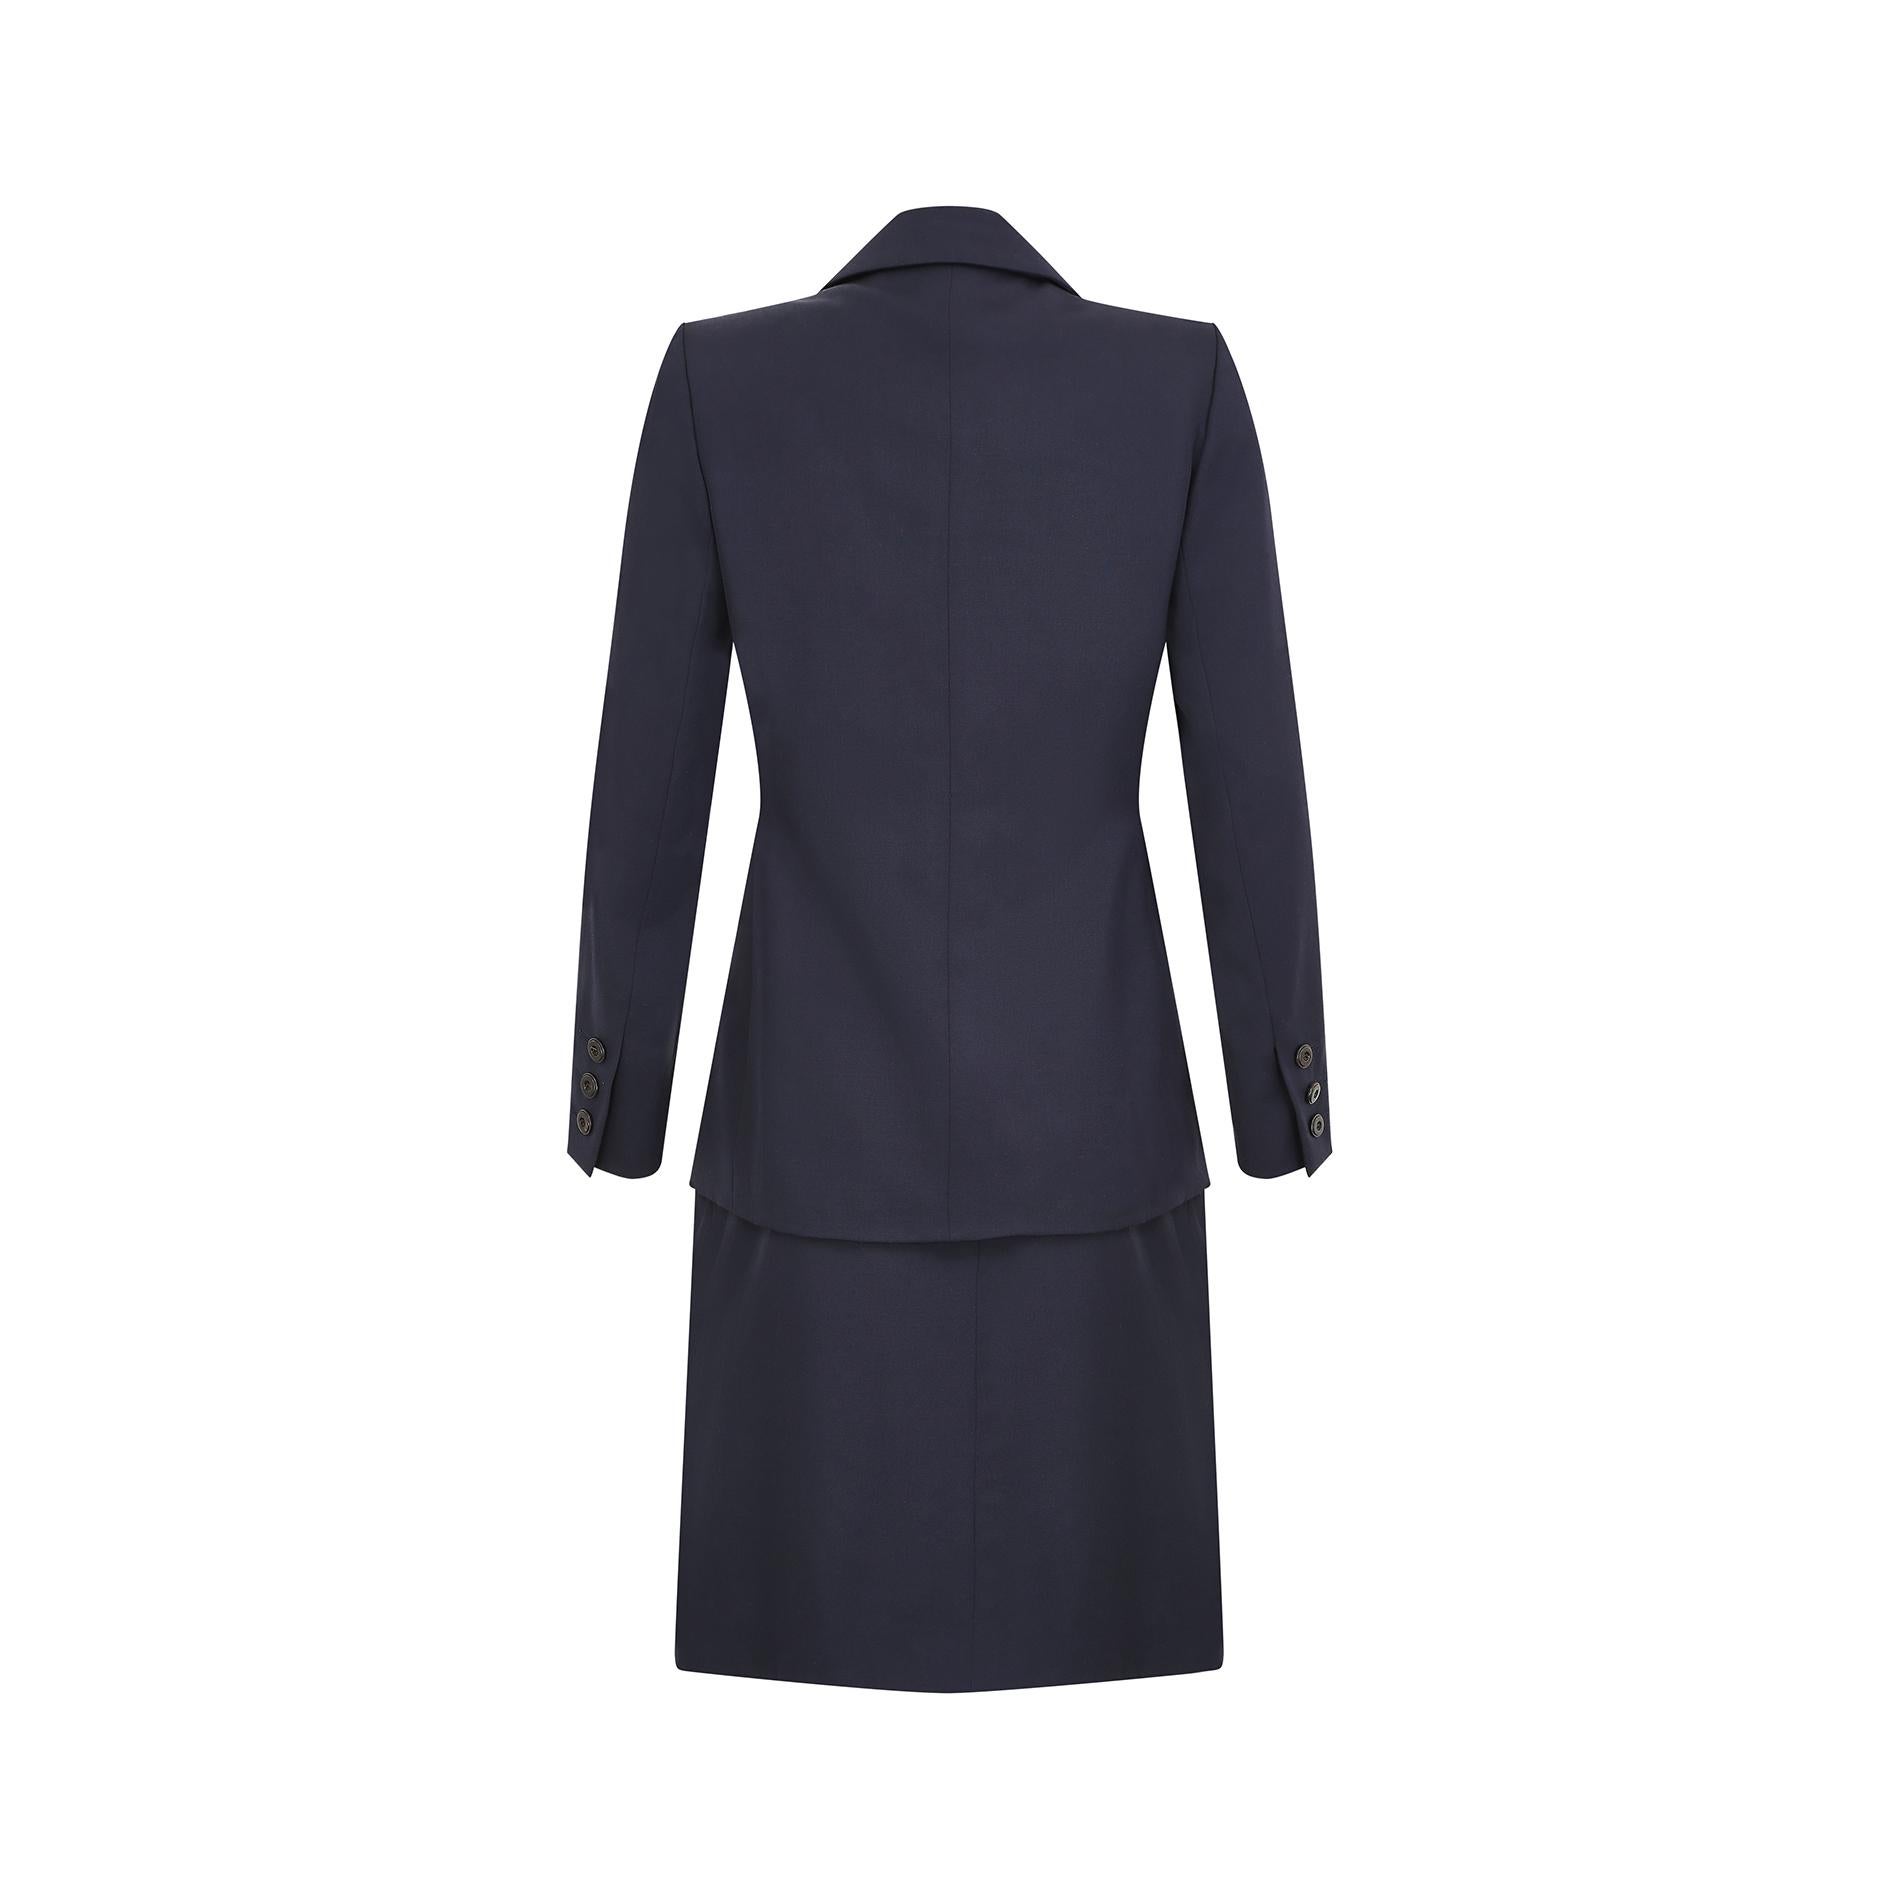 1990s Yves Saint Laurent Navy Blazer Skirt Suit In Excellent Condition For Sale In London, GB